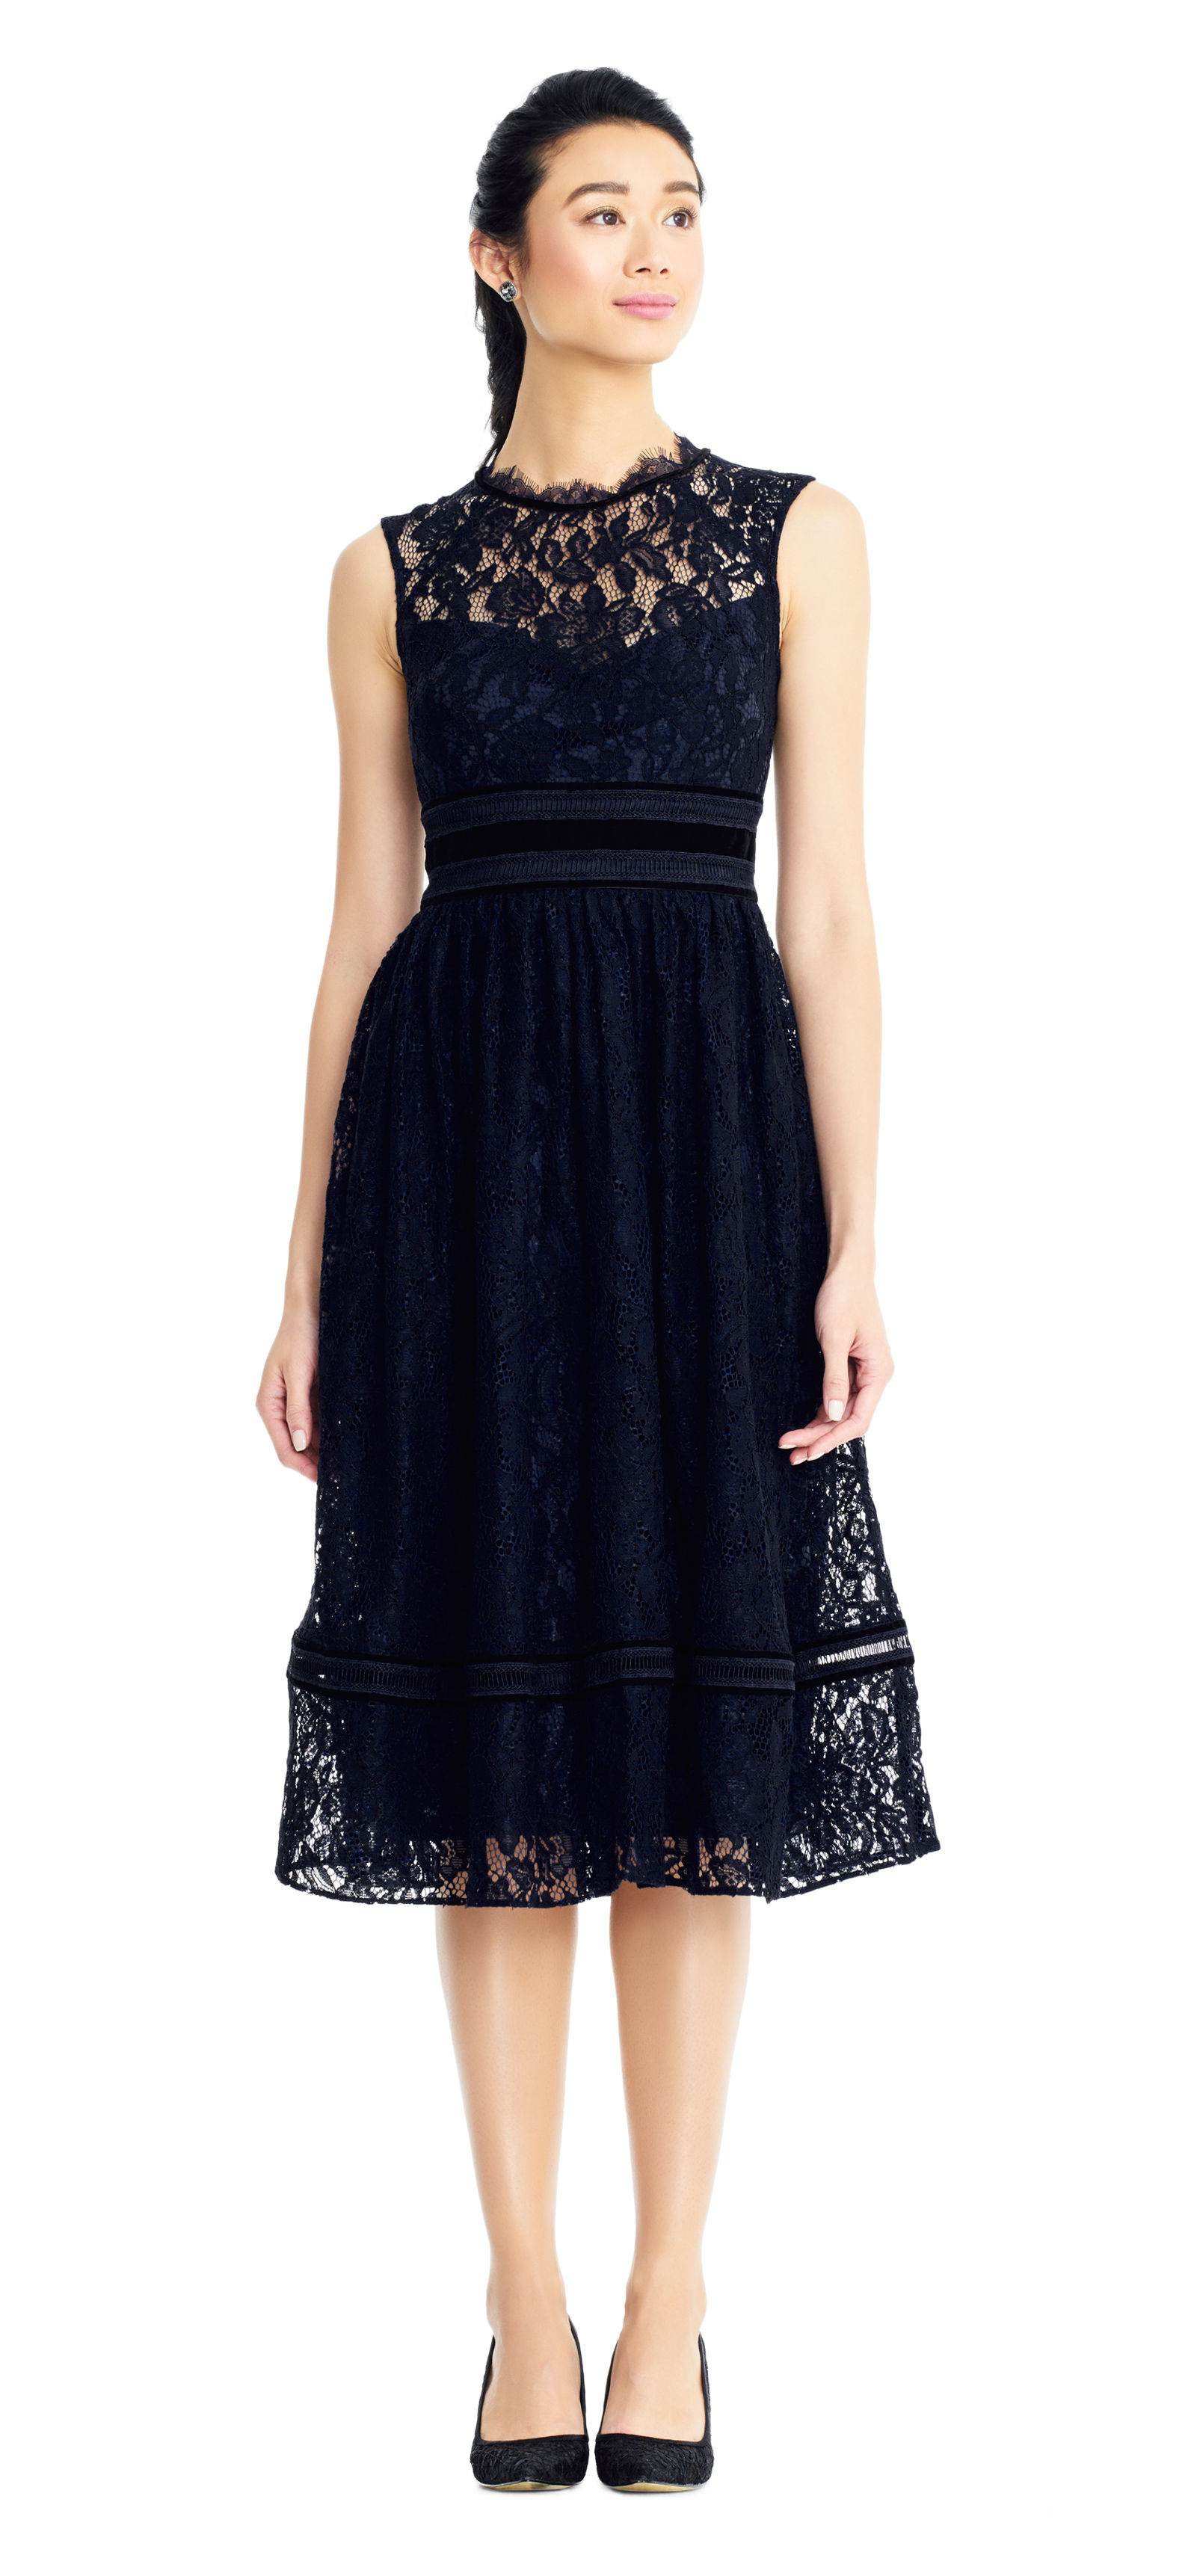 adrianna papell blue lace dress